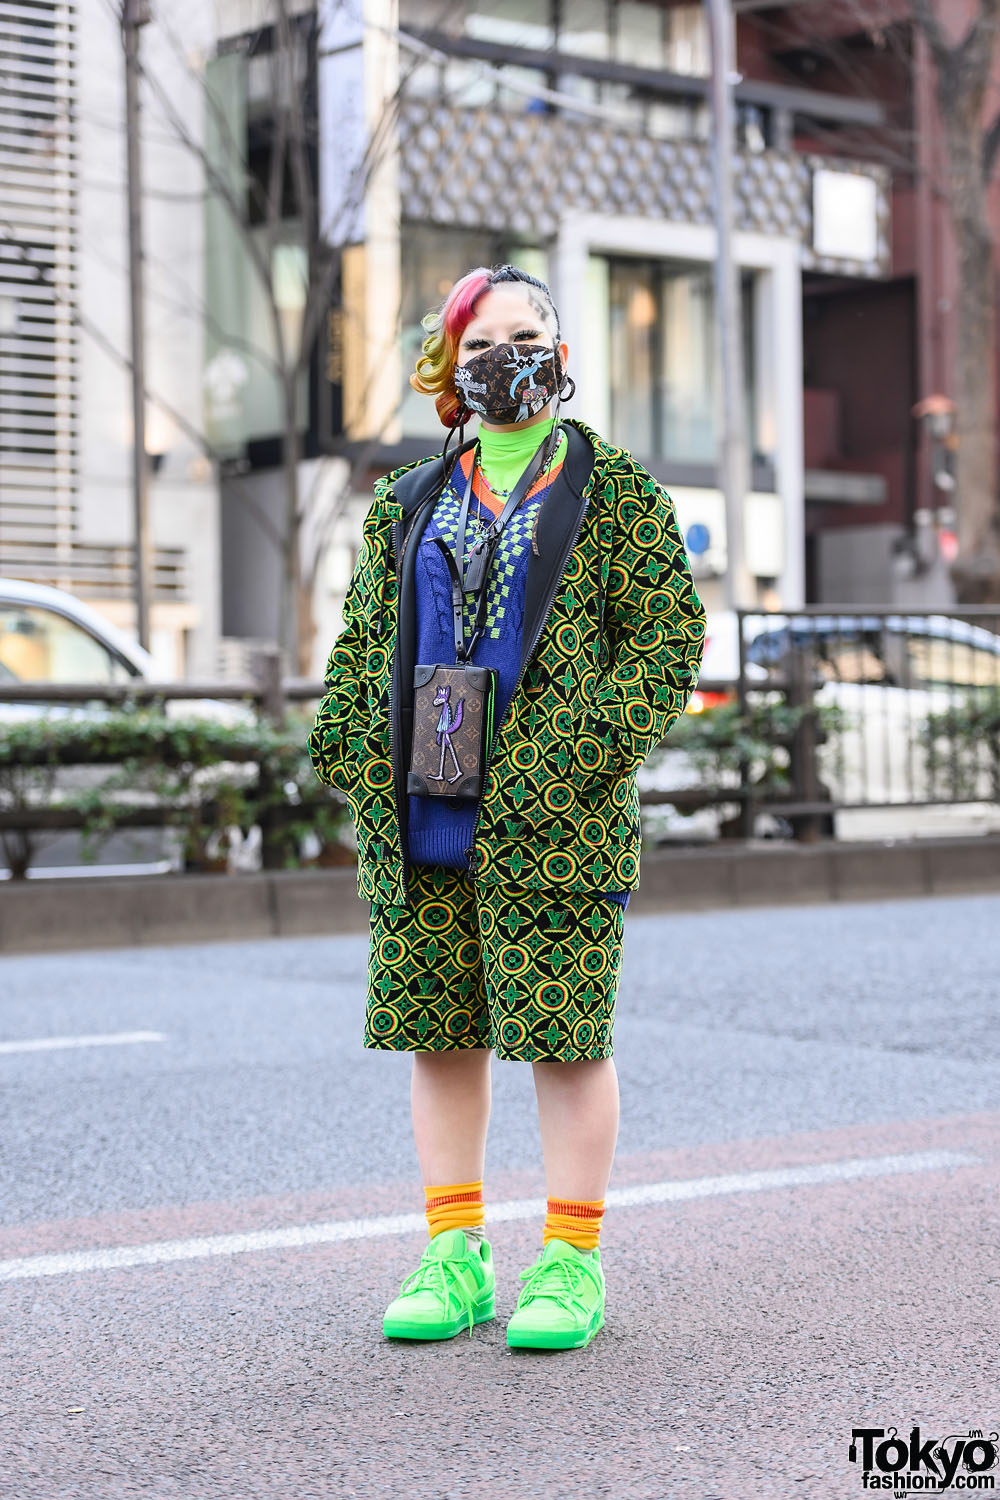 Tokyo Fashion on X: Japanese student Mako on the street in Harajuku  wearing a full Louis Vuitton style w/ the LV monogram shaved into her hair,  a green LV setup, an LV